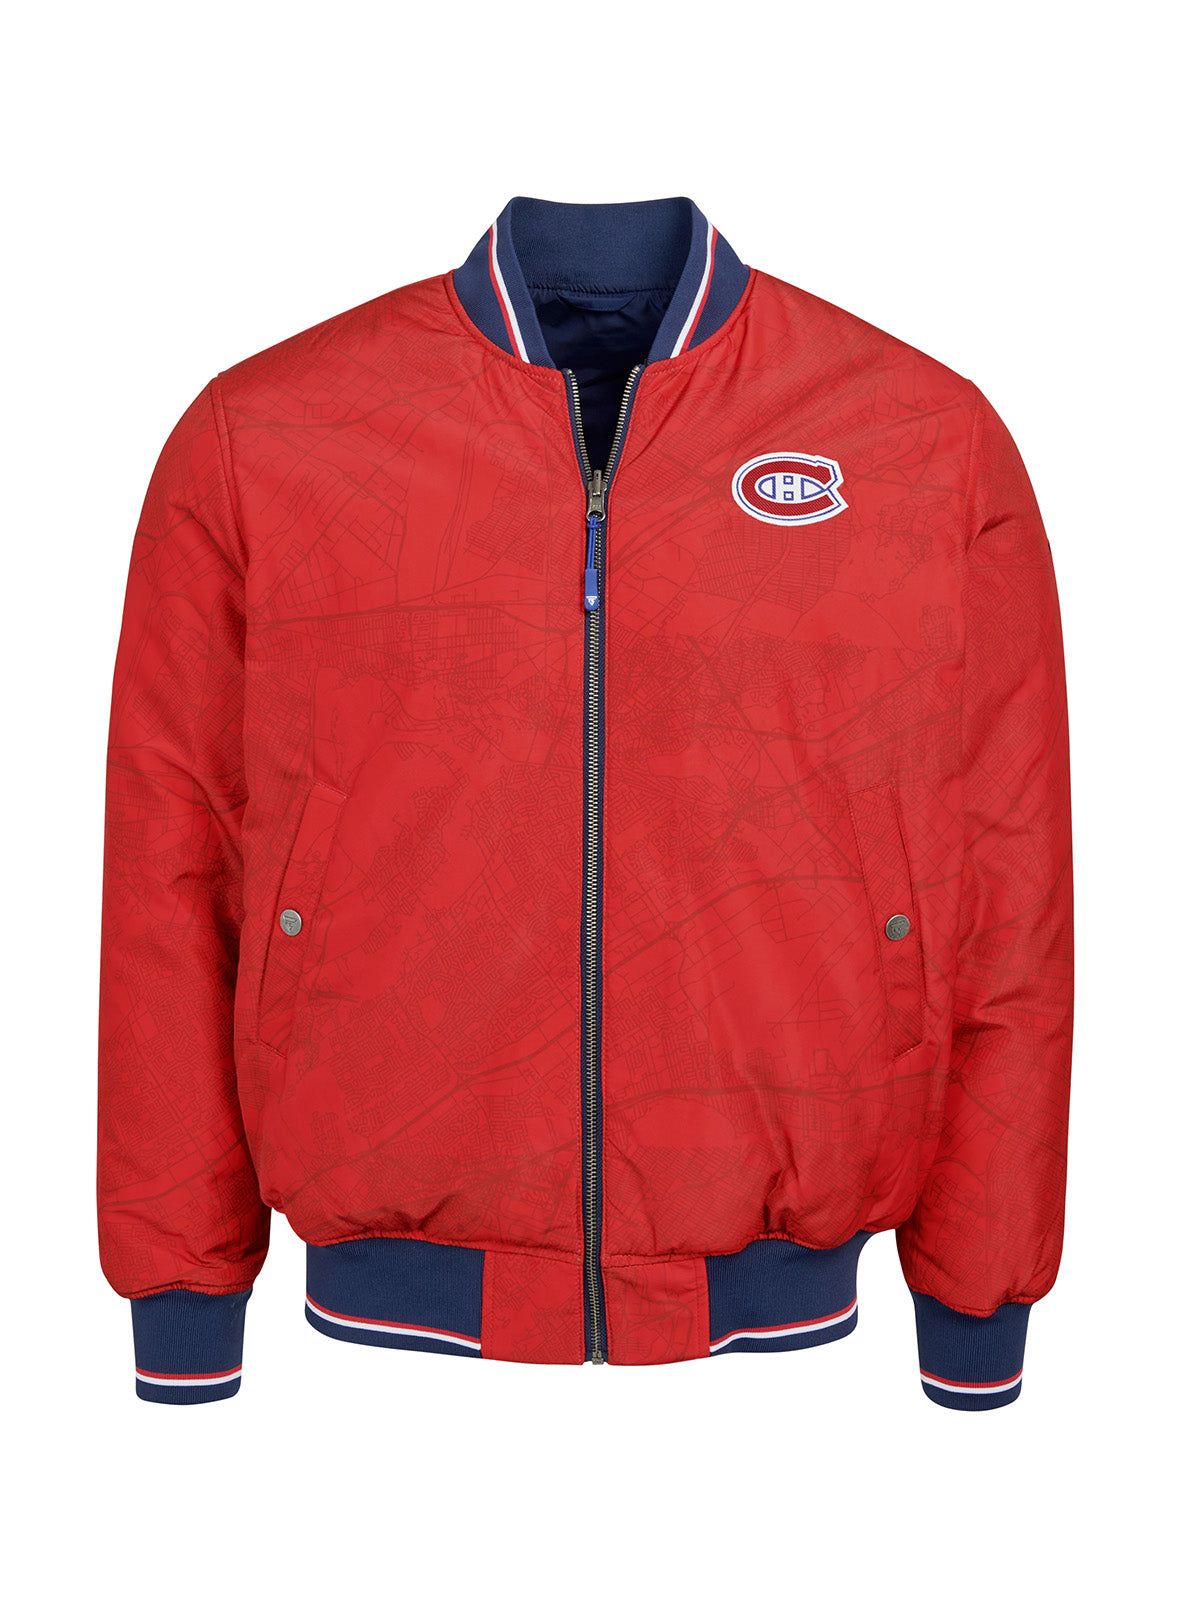 Montreal Canadiens Bomber - Reversible bomber jacket featuring the iconic Montreal Canadiens logo with ribbed cuffs, collar and hem in the team colors